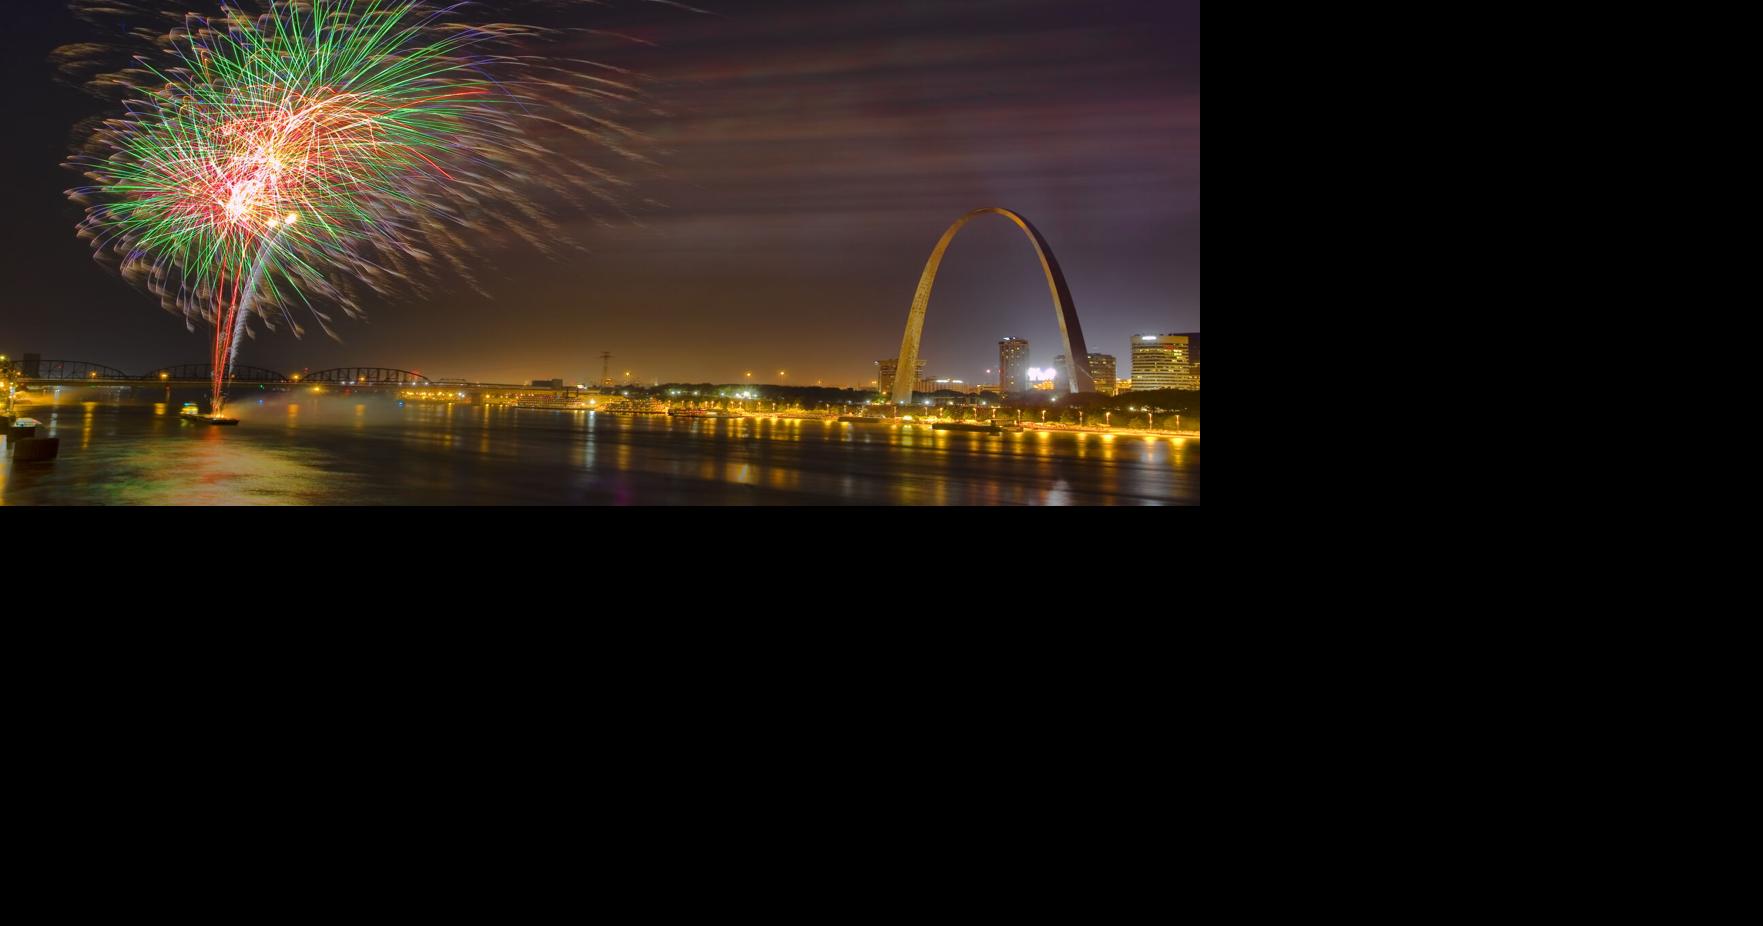 5 St. Louis destinations to watch fireworks light up the night sky